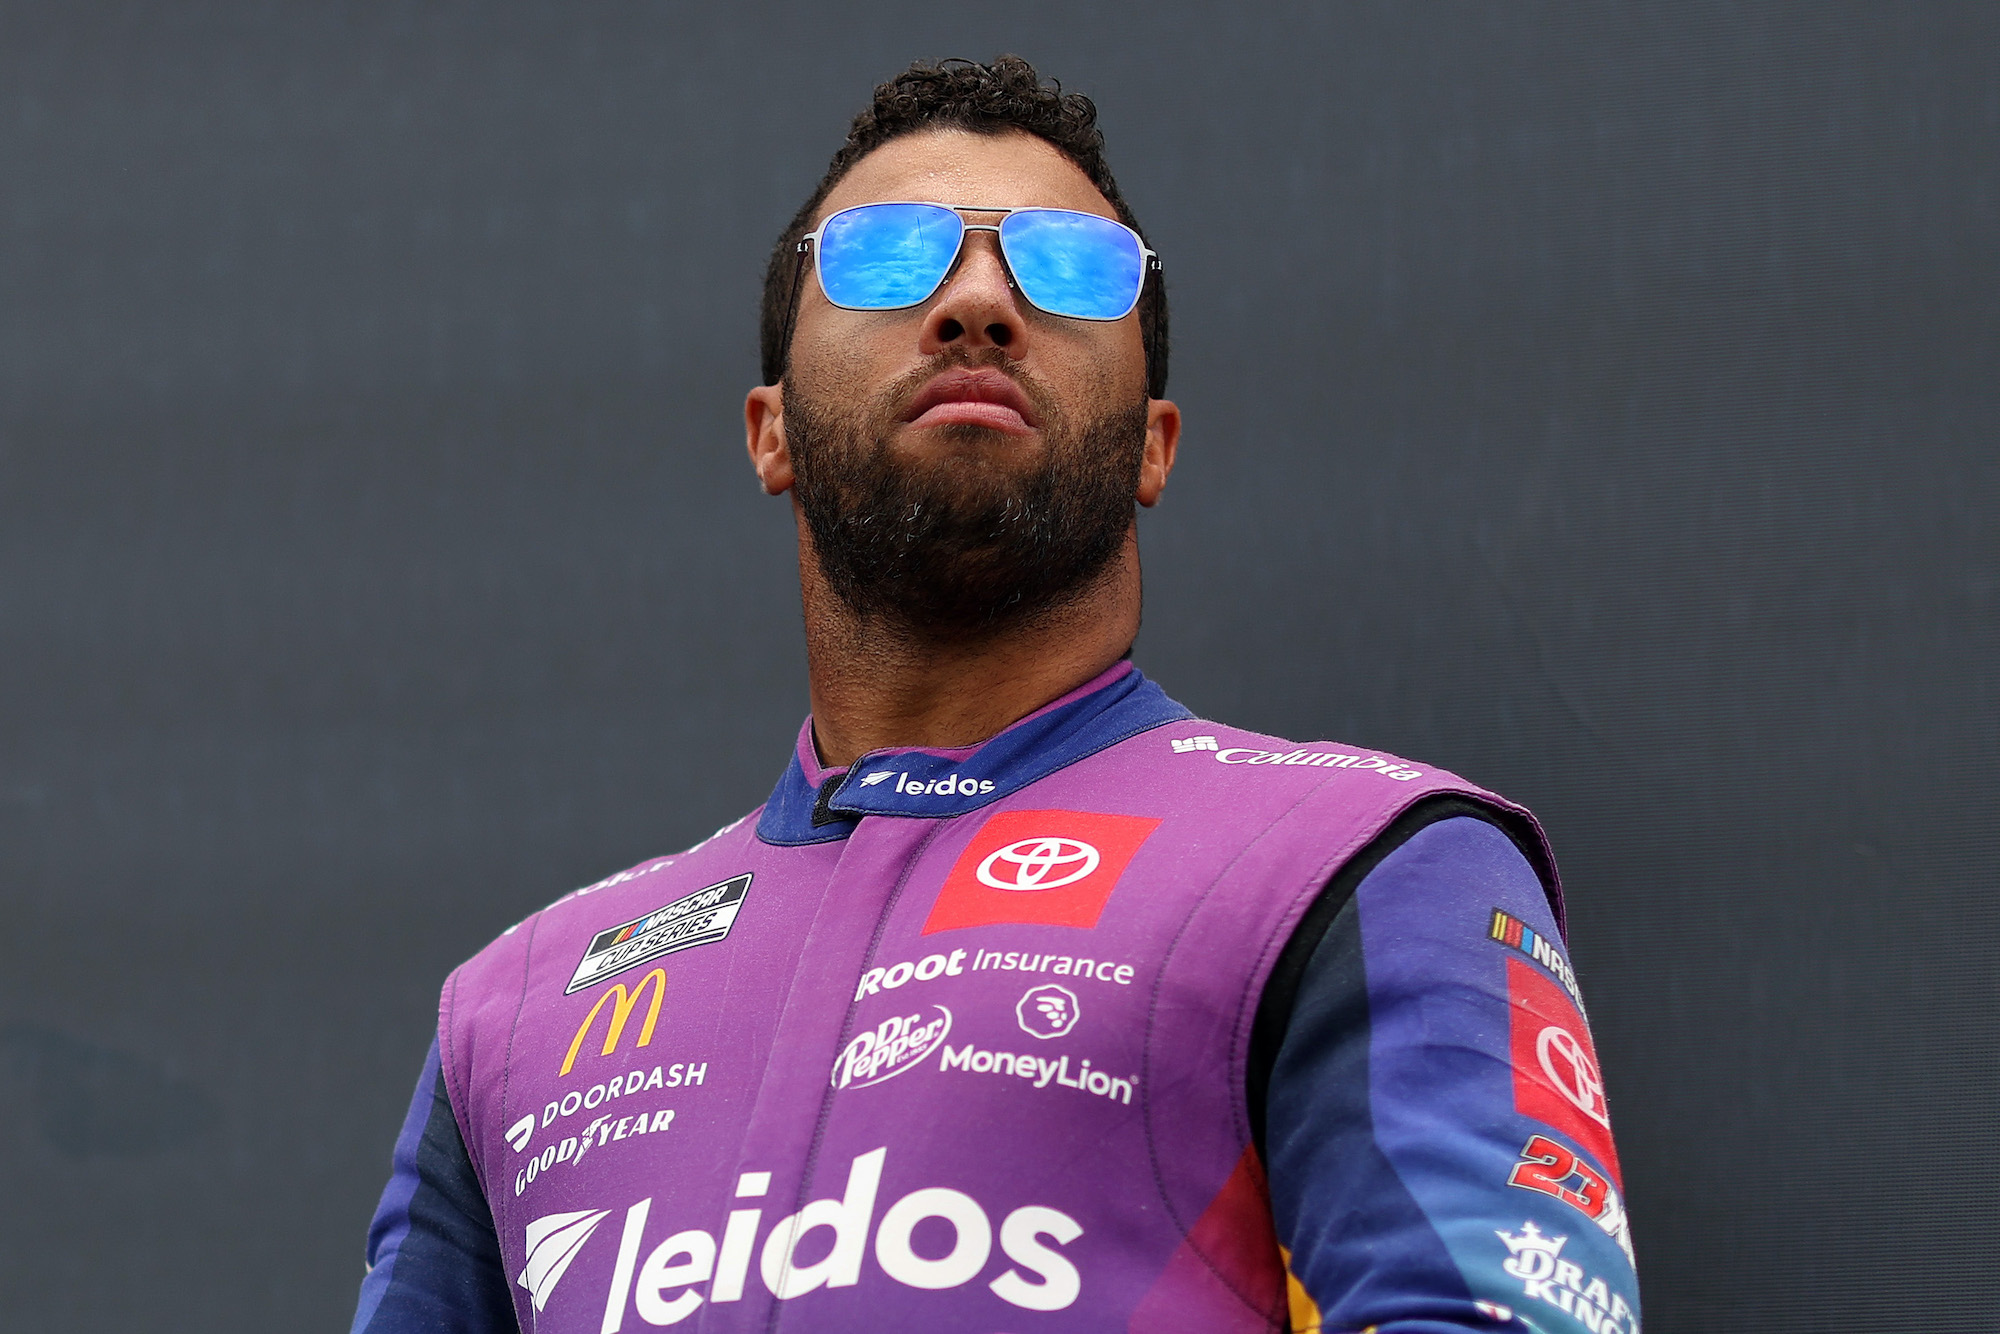 Bubba Wallace backstage before race.